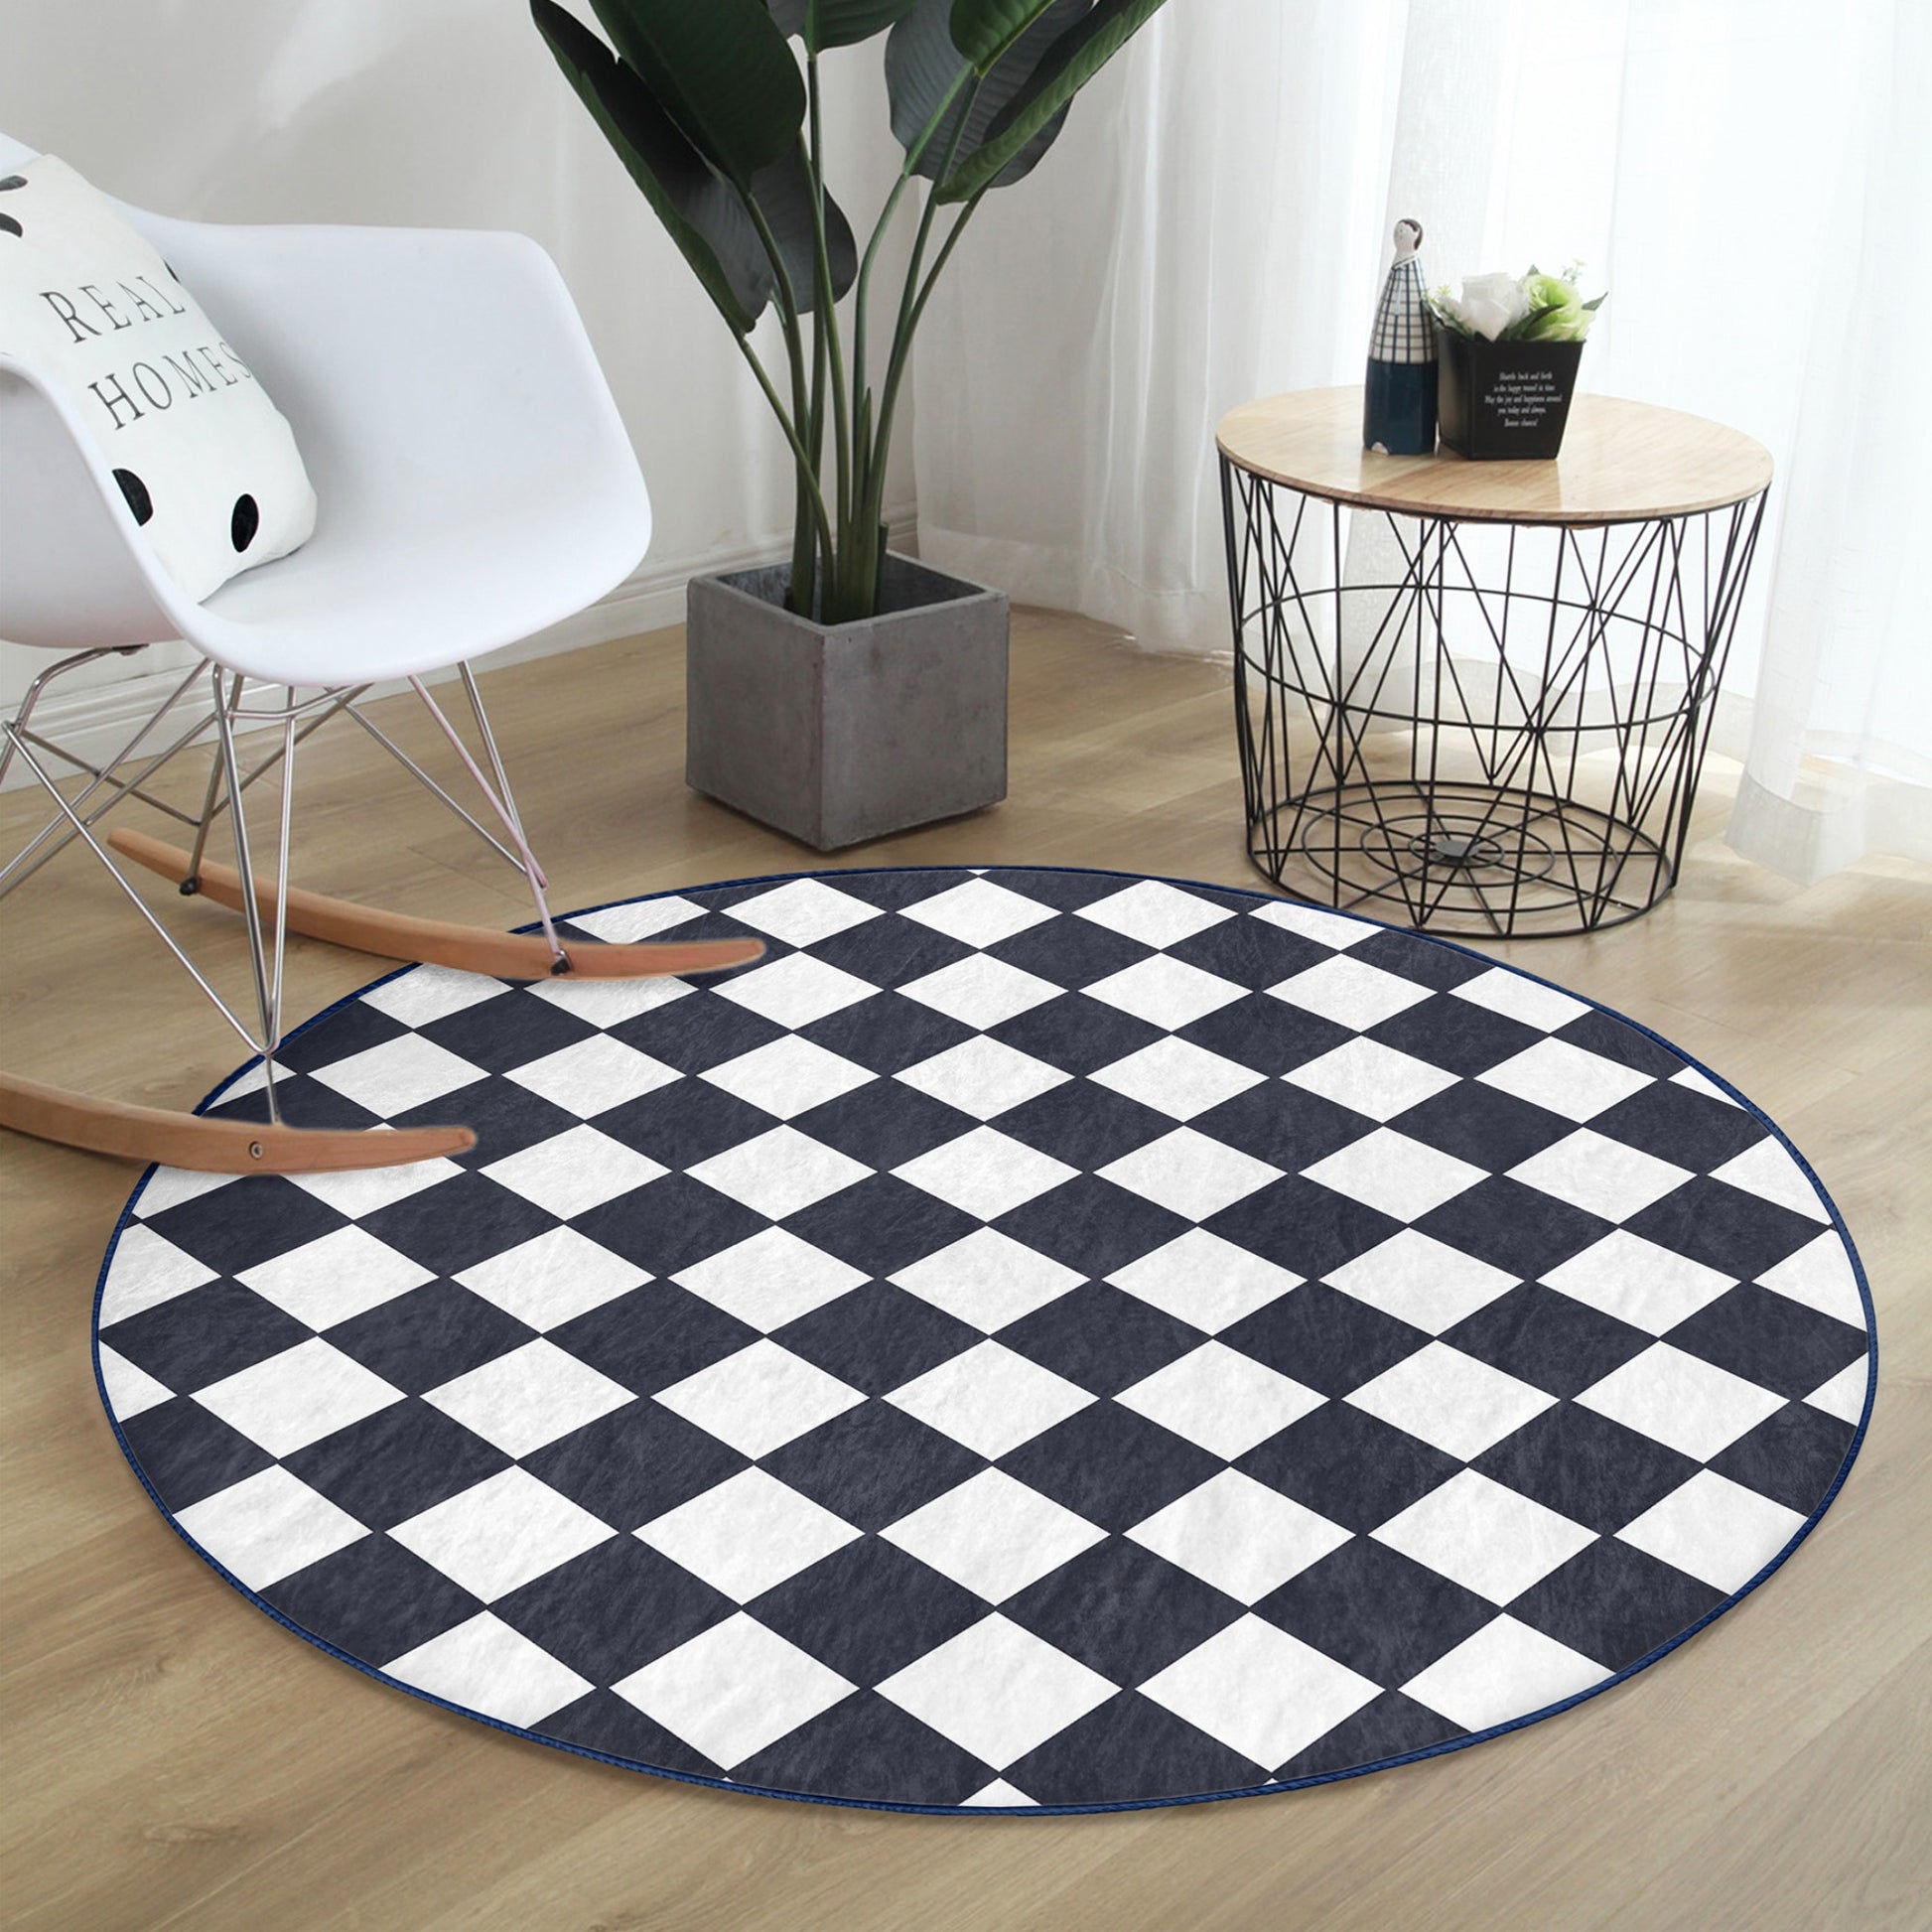 Washable Rug with Checkered Design - Easy Maintenance